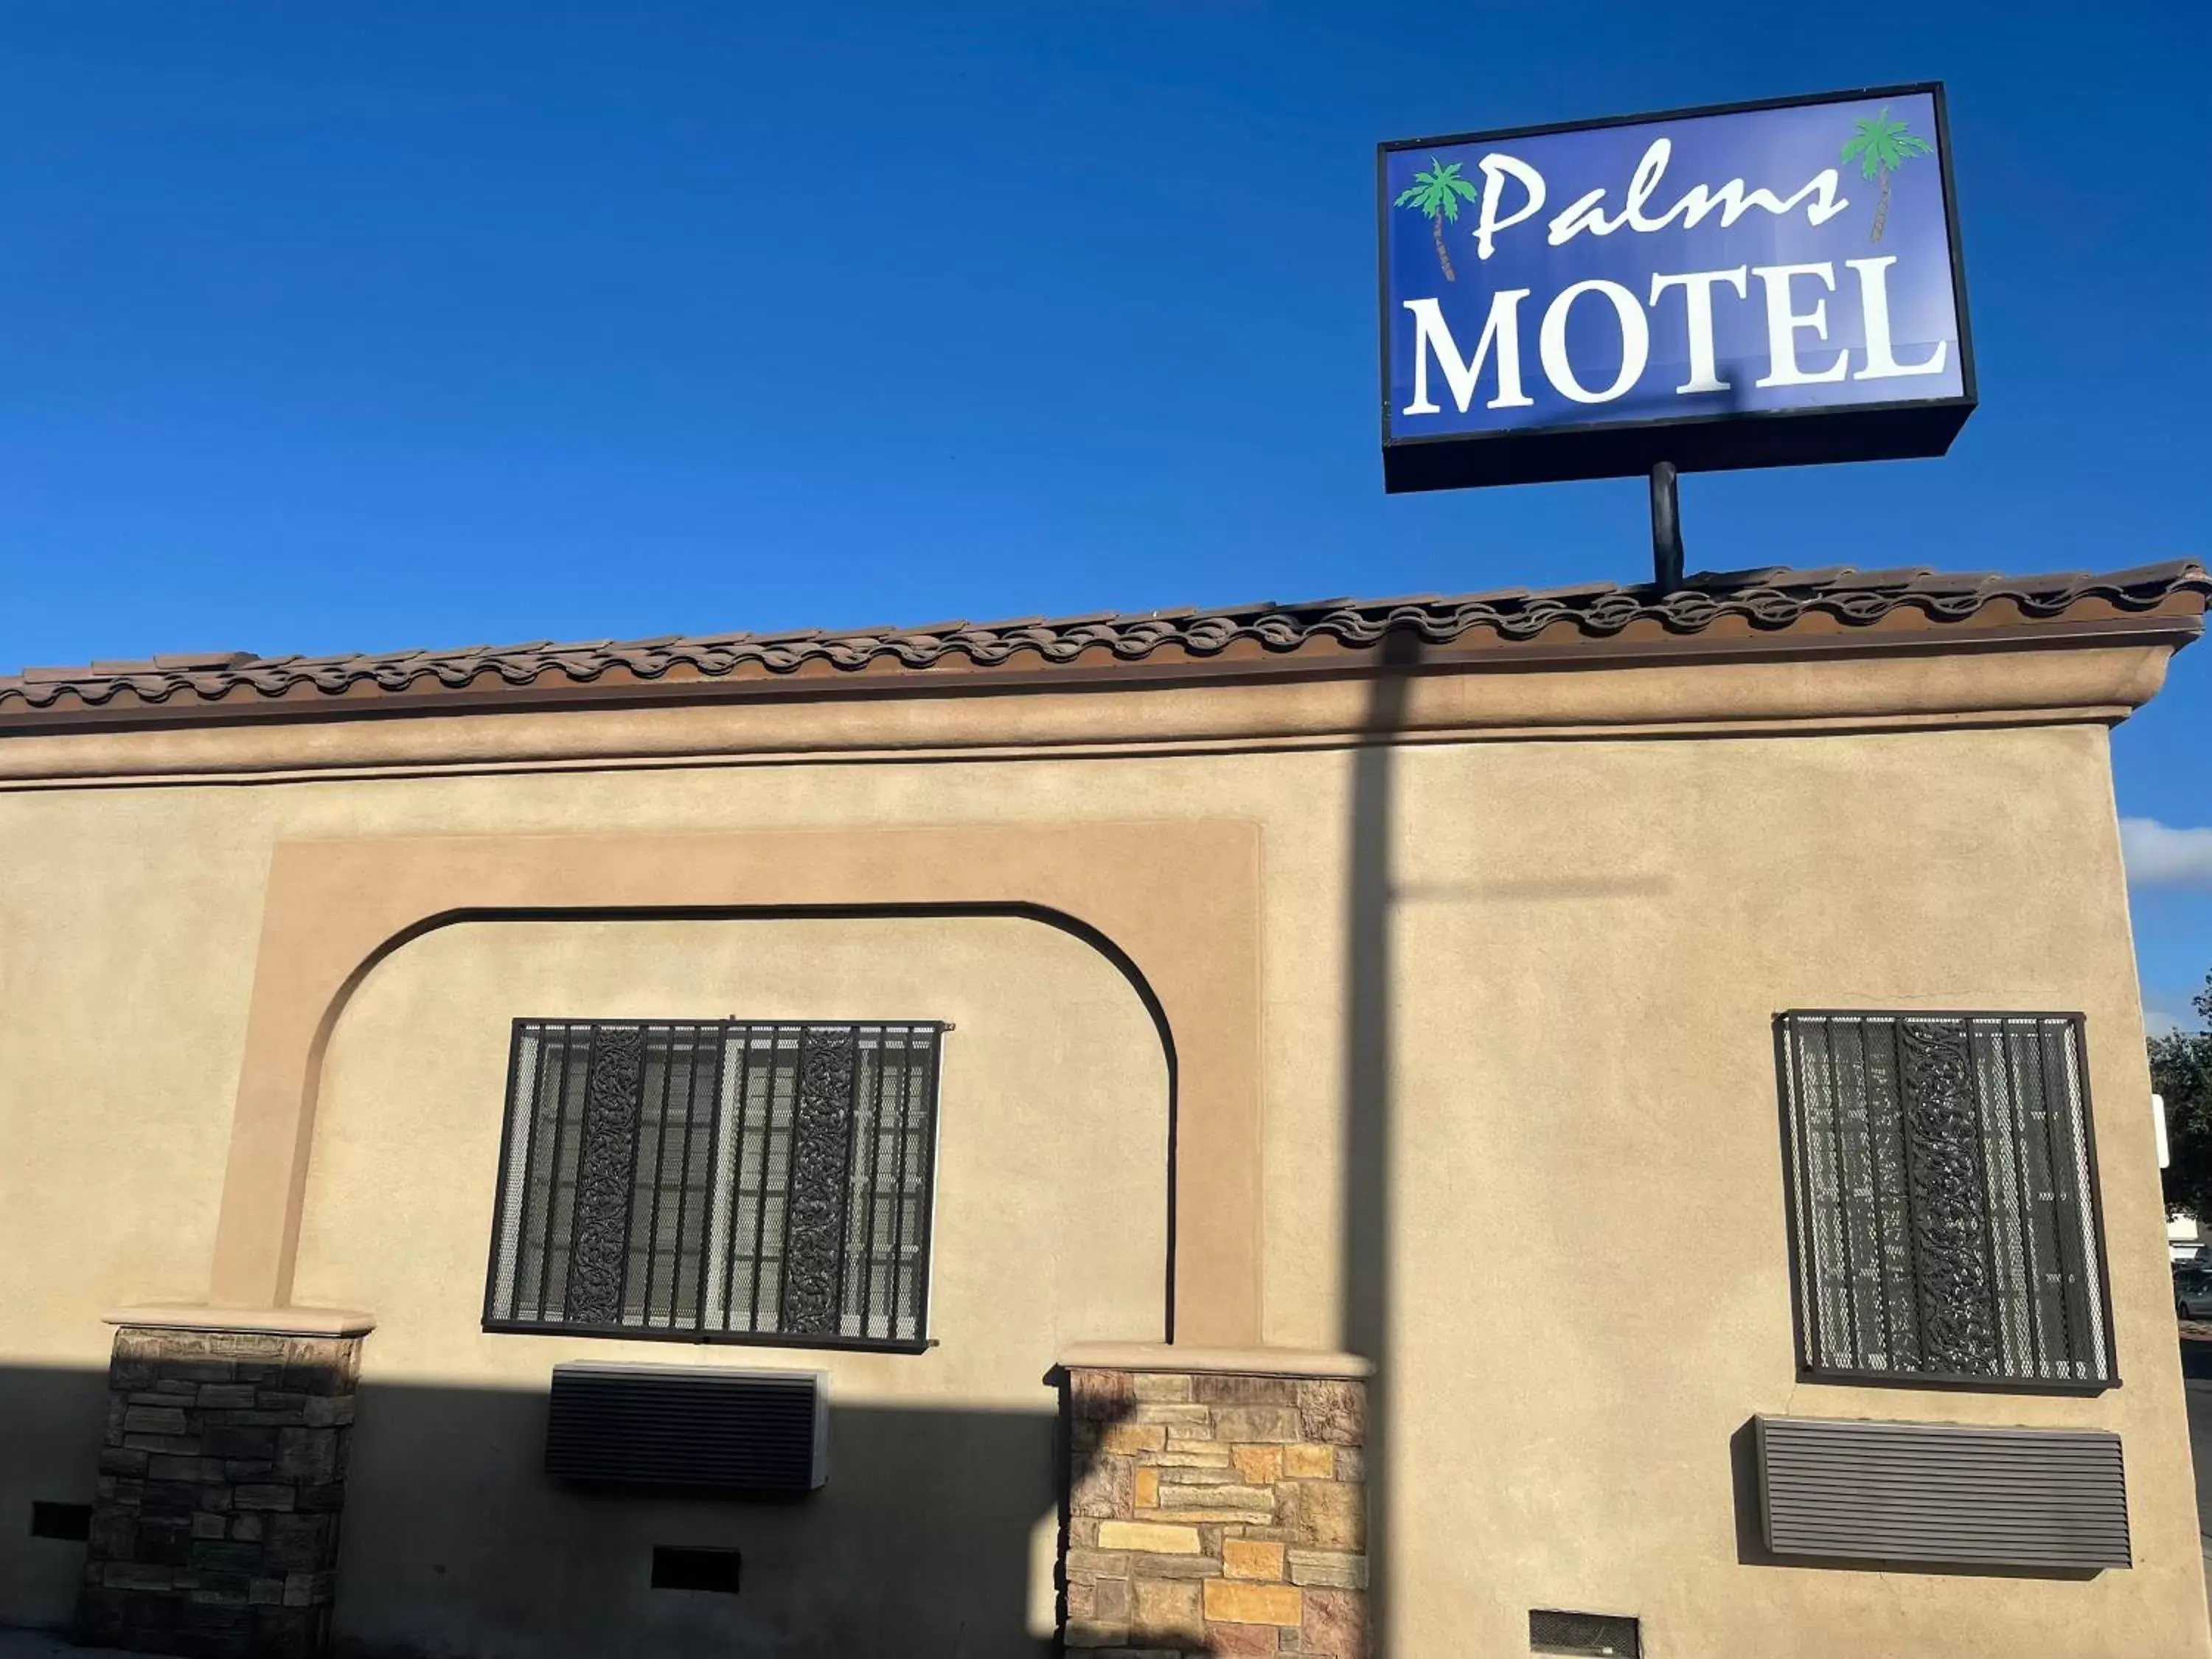 Property building in Palms Motel